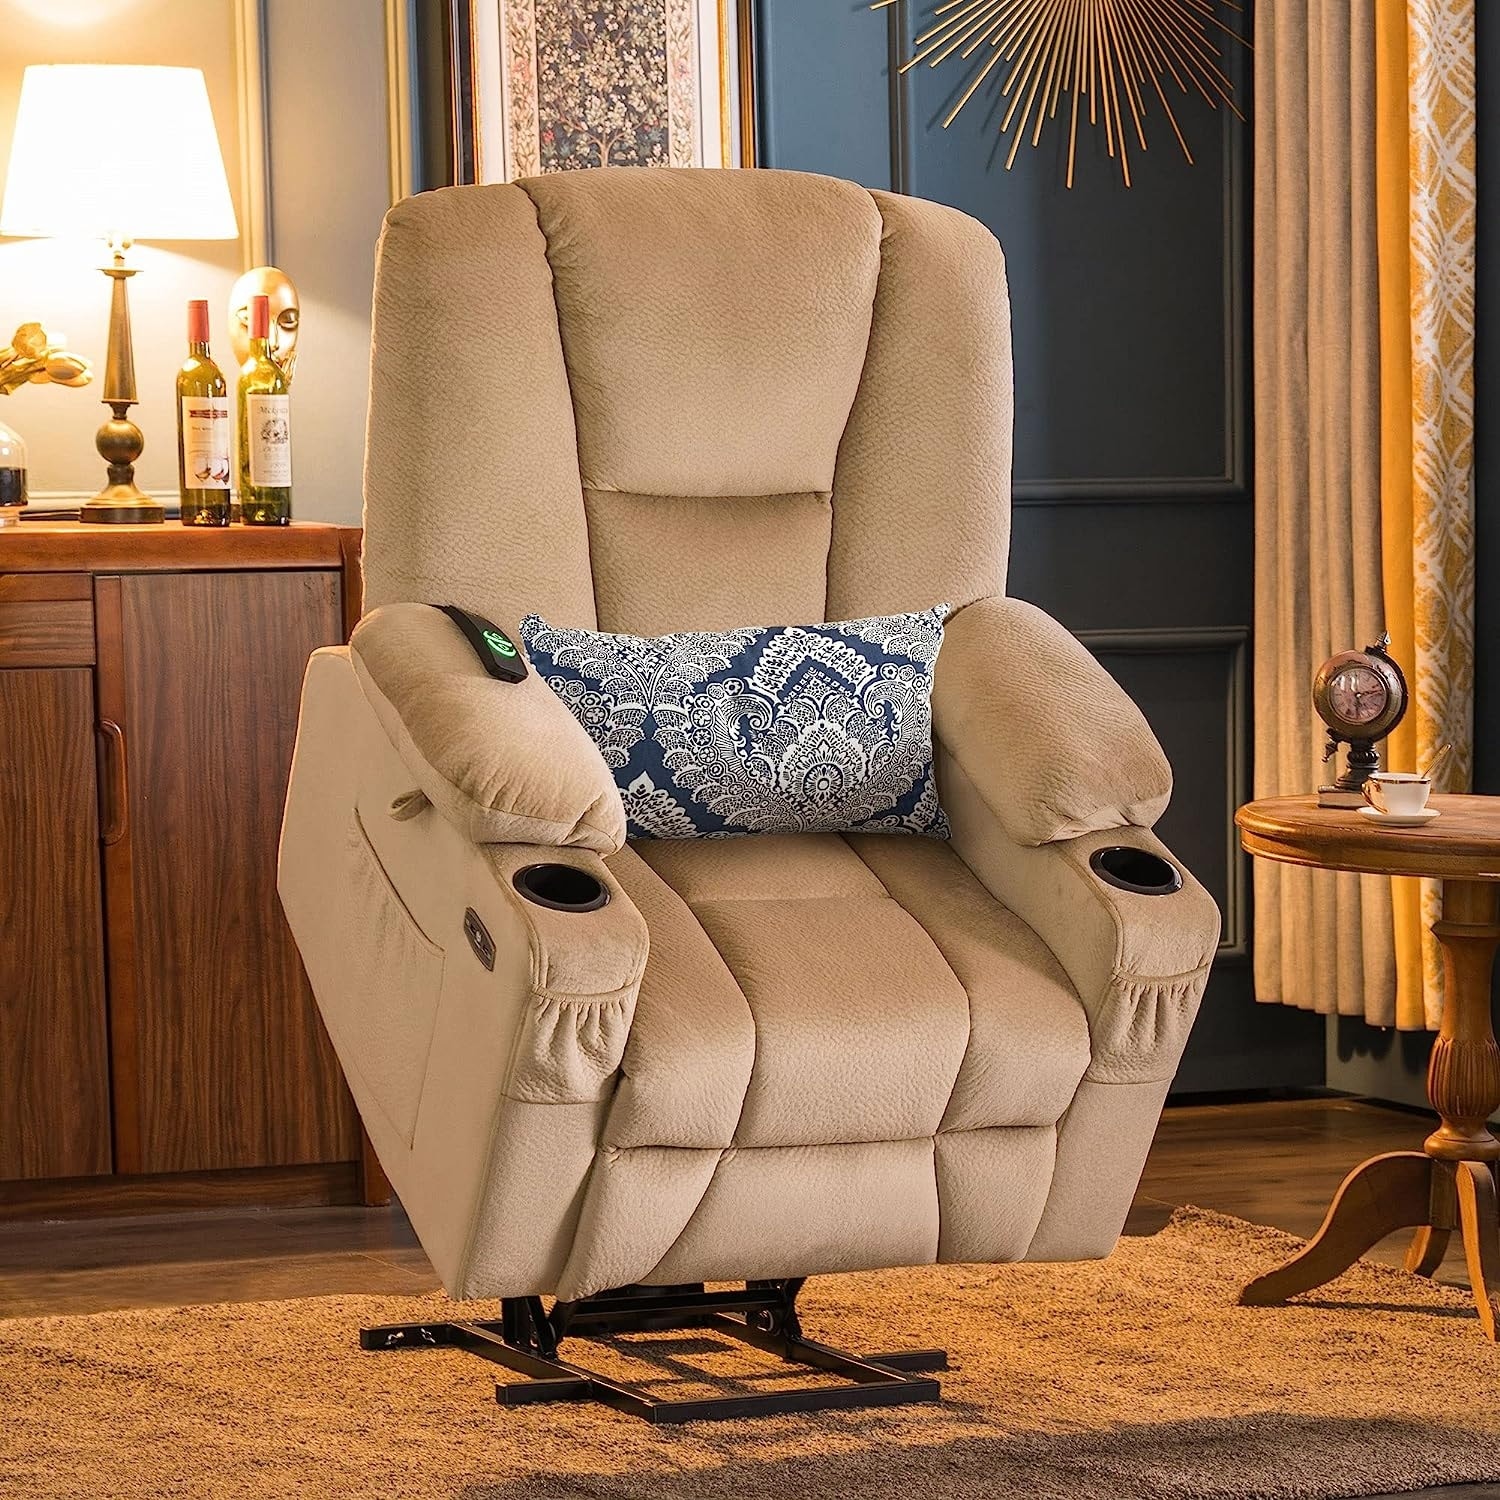 https://ak1.ostkcdn.com/images/products/is/images/direct/e059475c3cd5c1ede5b5549b6ca9af22cf9427e9/MCombo-Electric-Power-Lift-Recliner-Chair-with-Extended-Footrest-for-Elderly-People%2C-3-Positions%2C-Lumbar-Pillow%2C-Fabric-7507.jpg